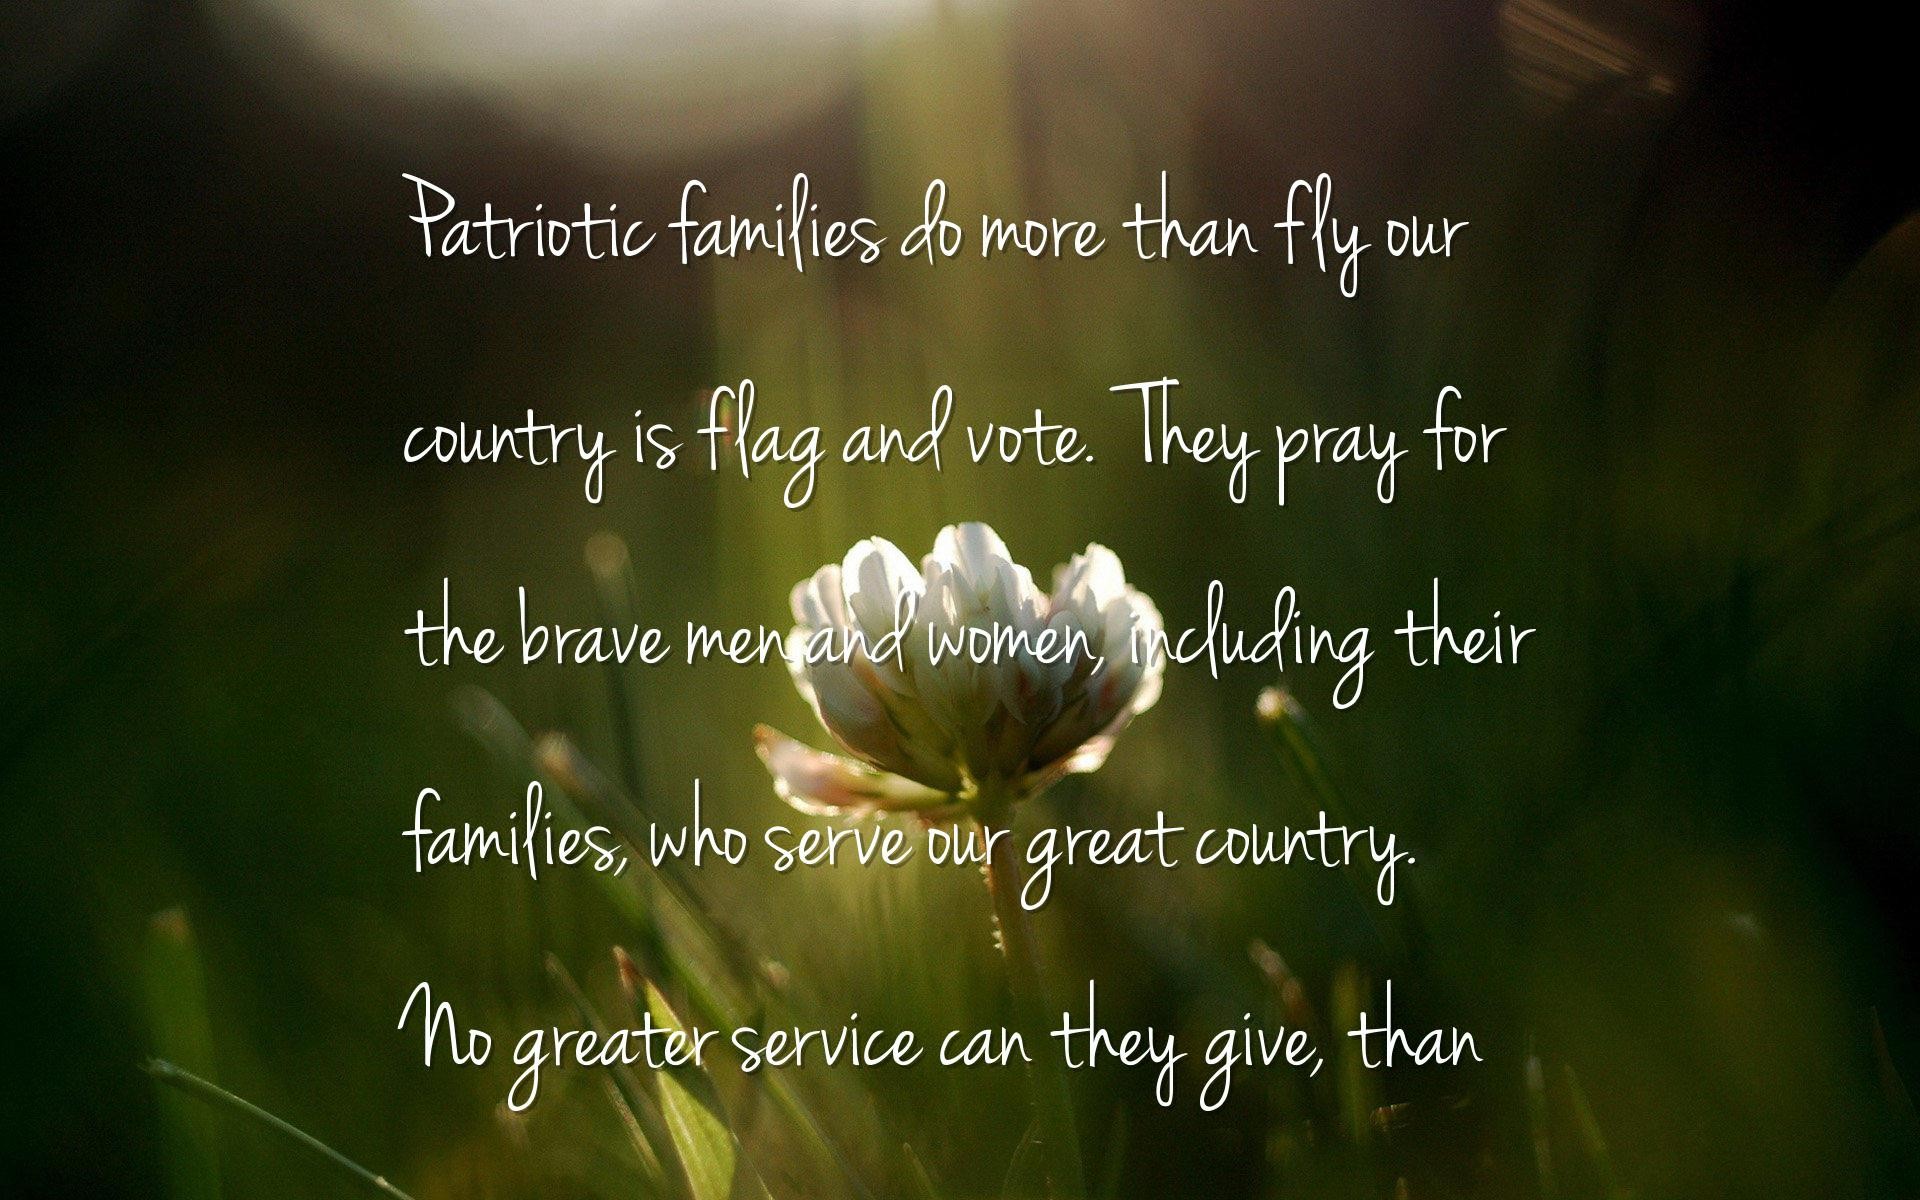 Patriotic families do more than fly our country's flag and vote. They pray for the brave men and women, including their families, who serve our great country